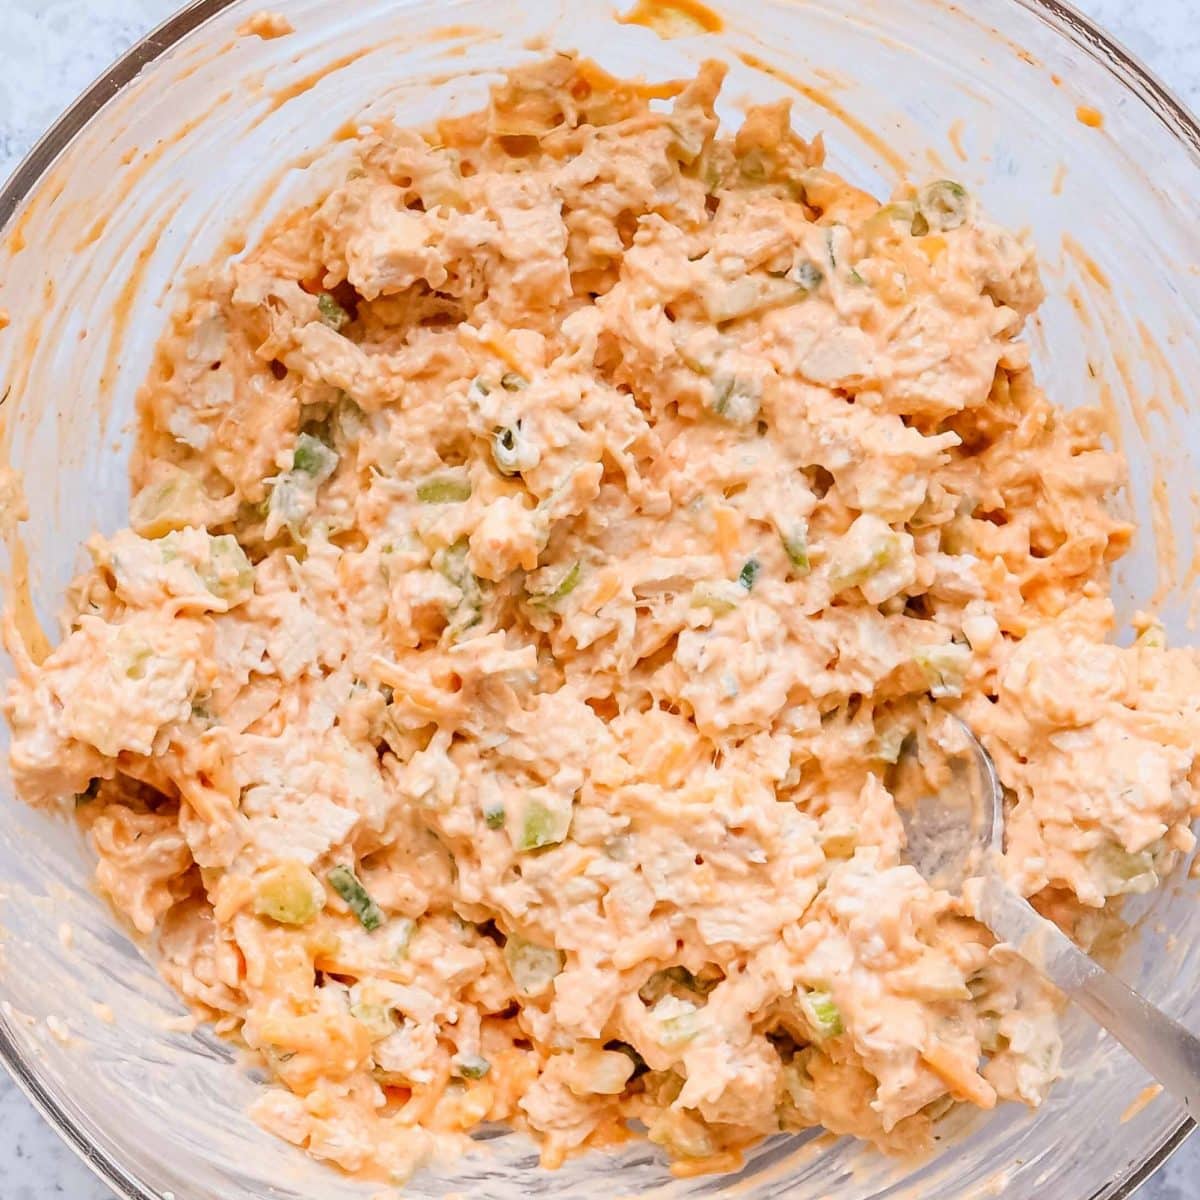 done mixing chicken salad